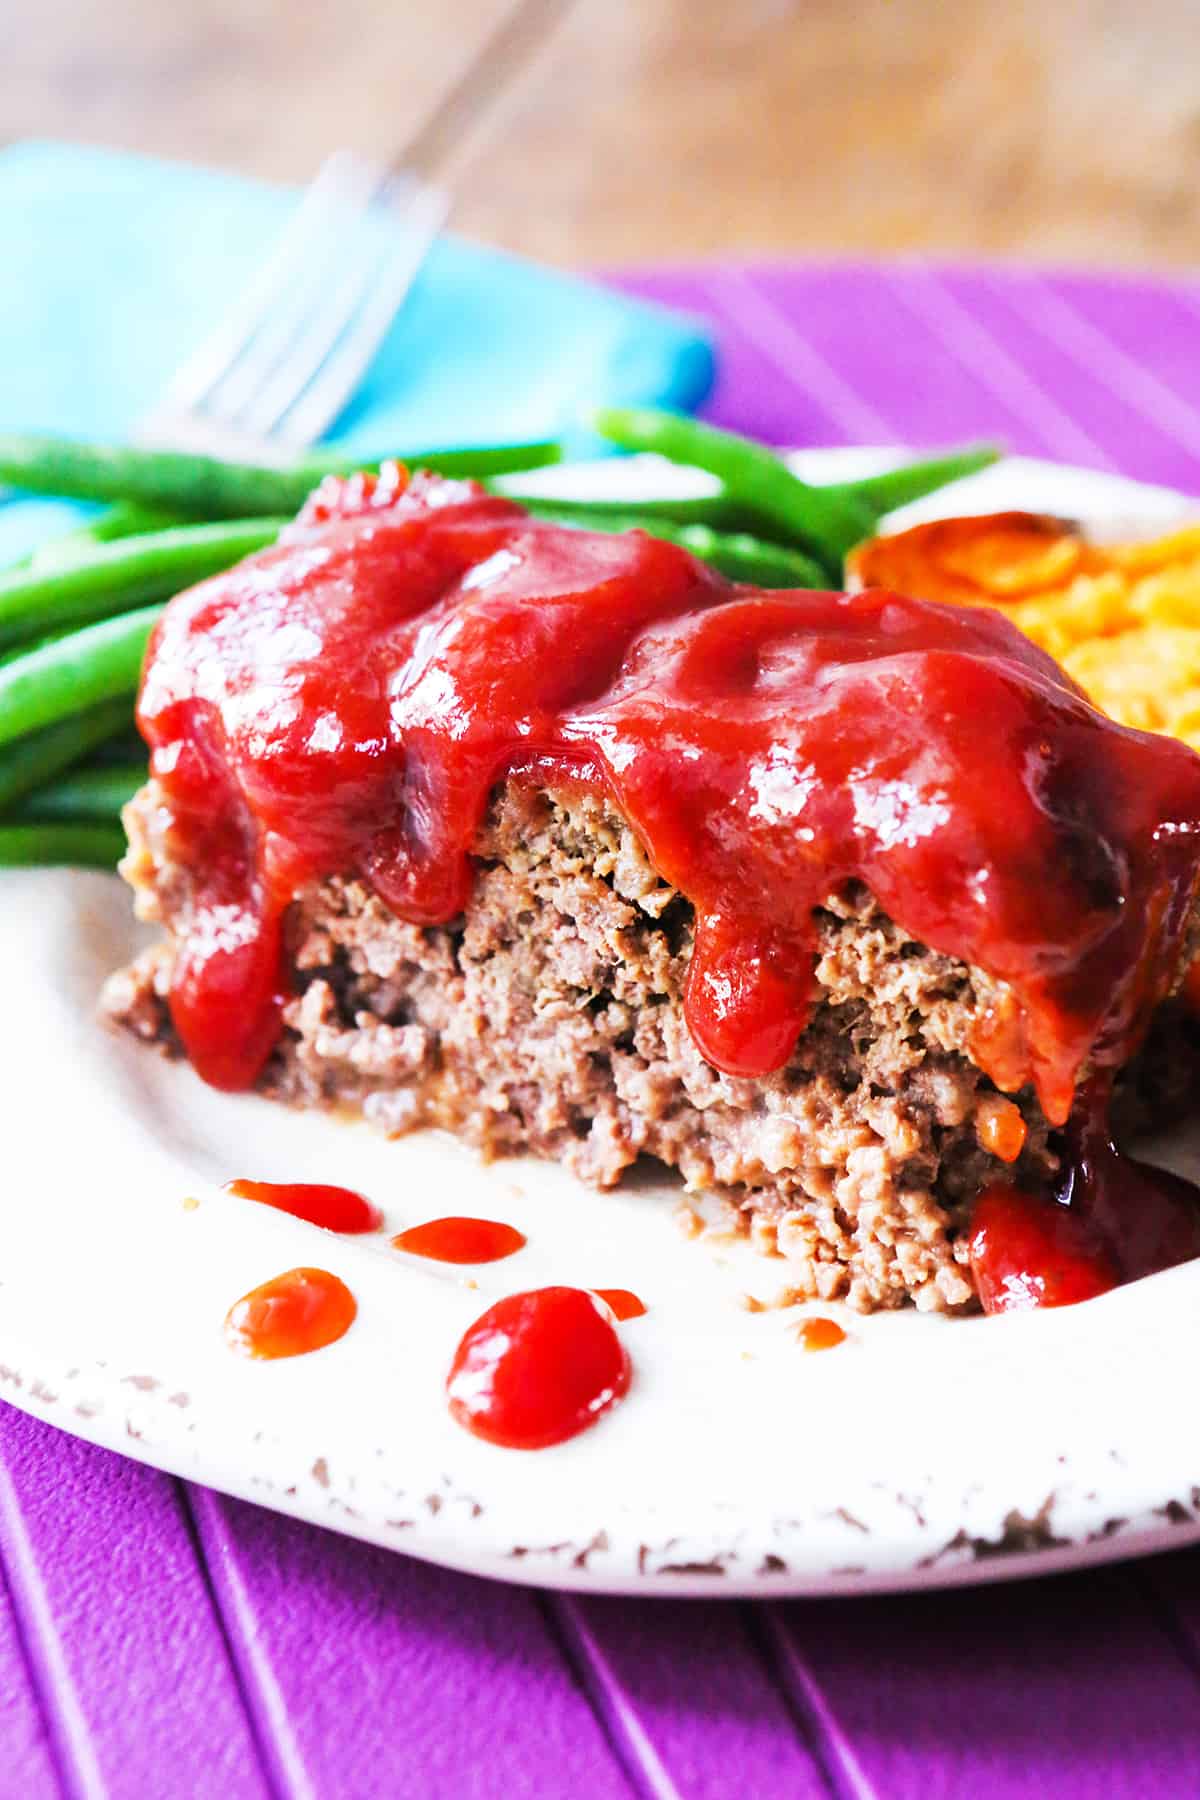 Slice of meatloaf on a plate with sauce dripping over the edges.